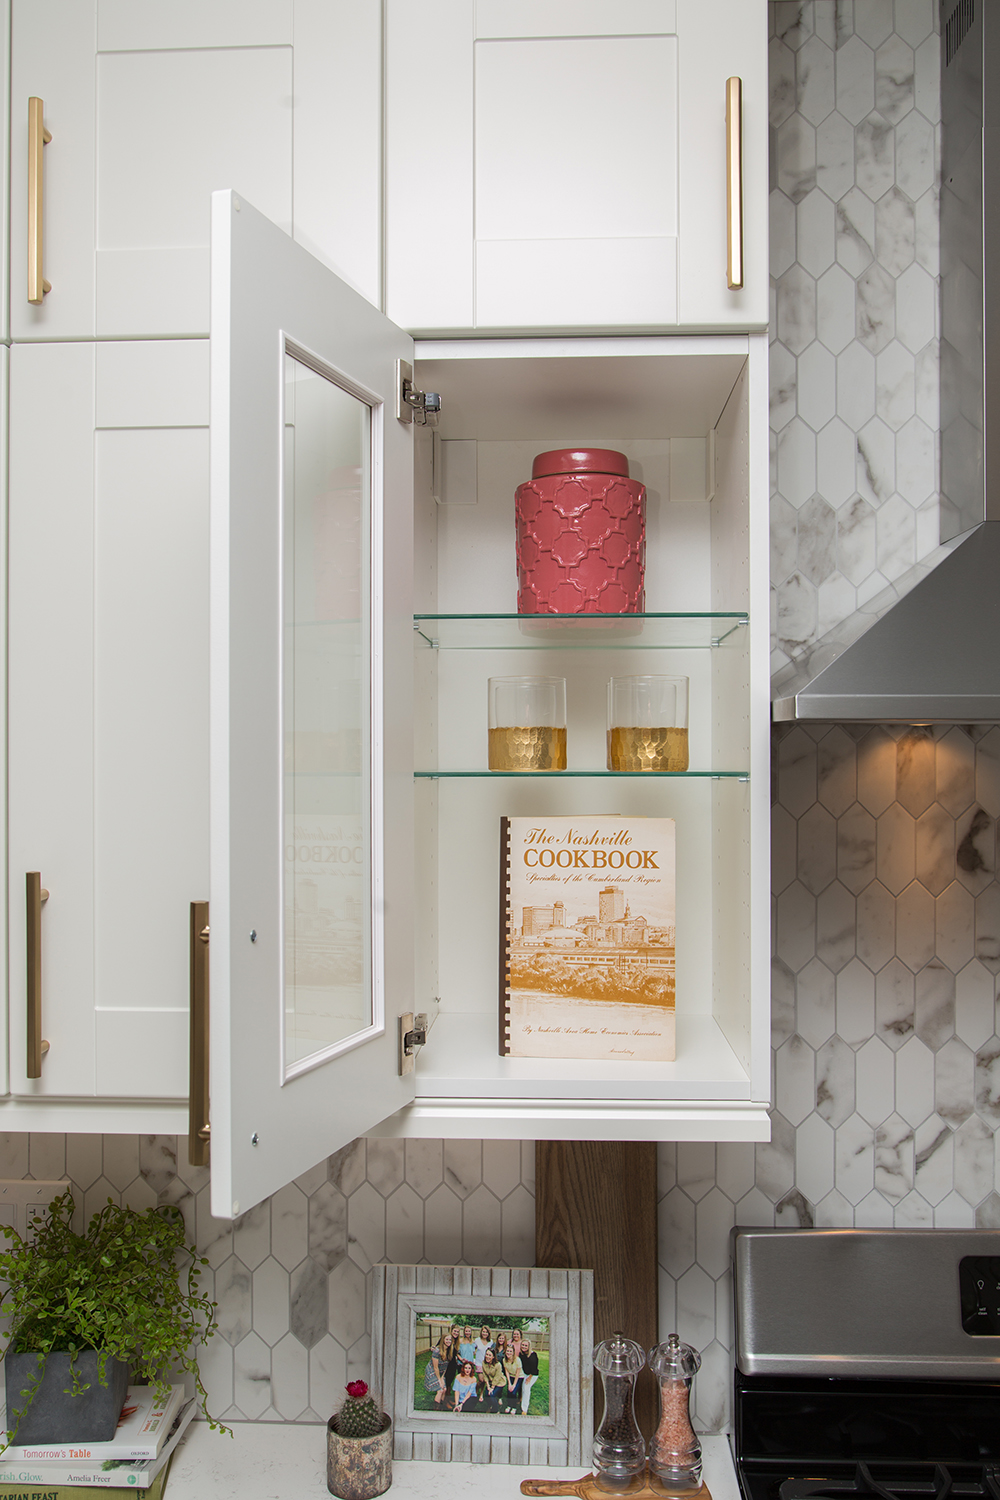 Kitchen cabinet with decor and cookbook on display